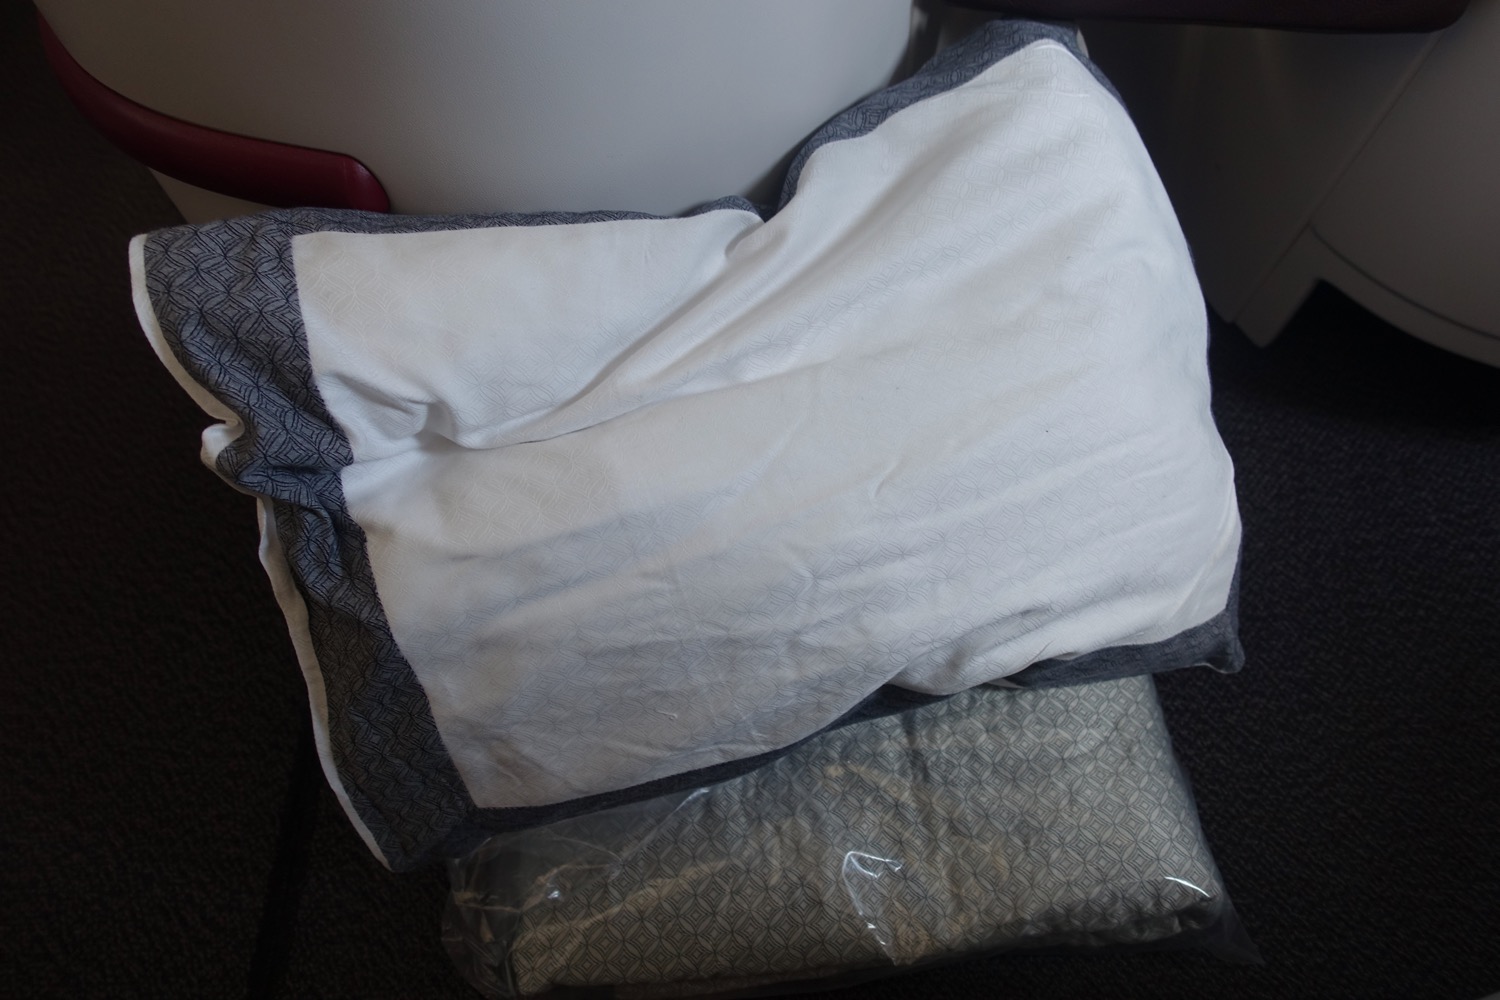 a white and grey pillow on a black surface